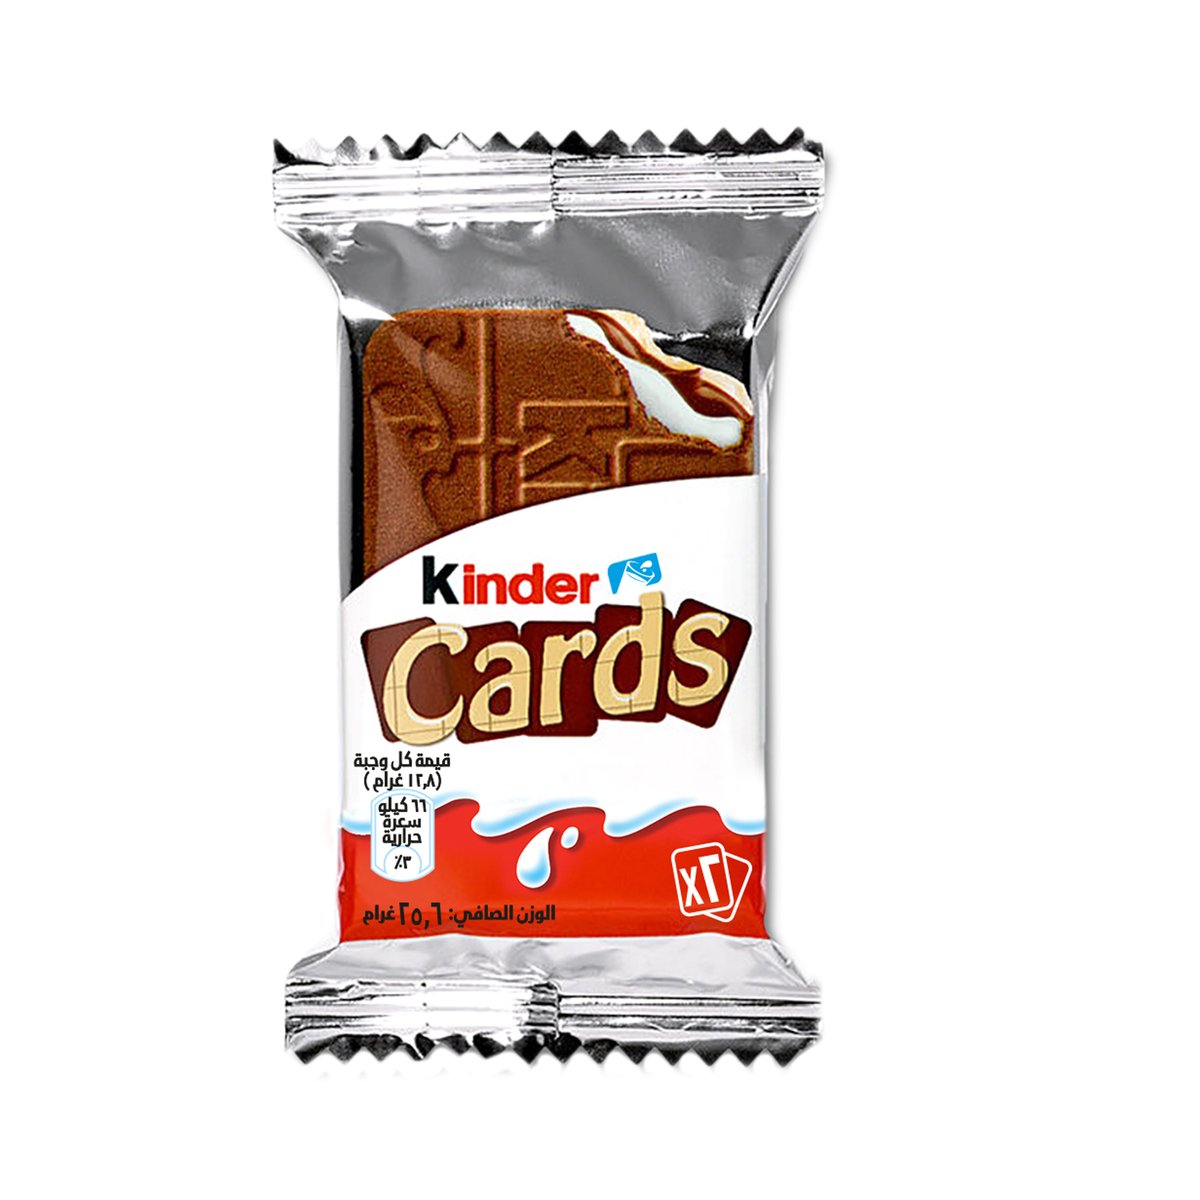 Kinder Cards Chocolate Biscuits 25.6 g